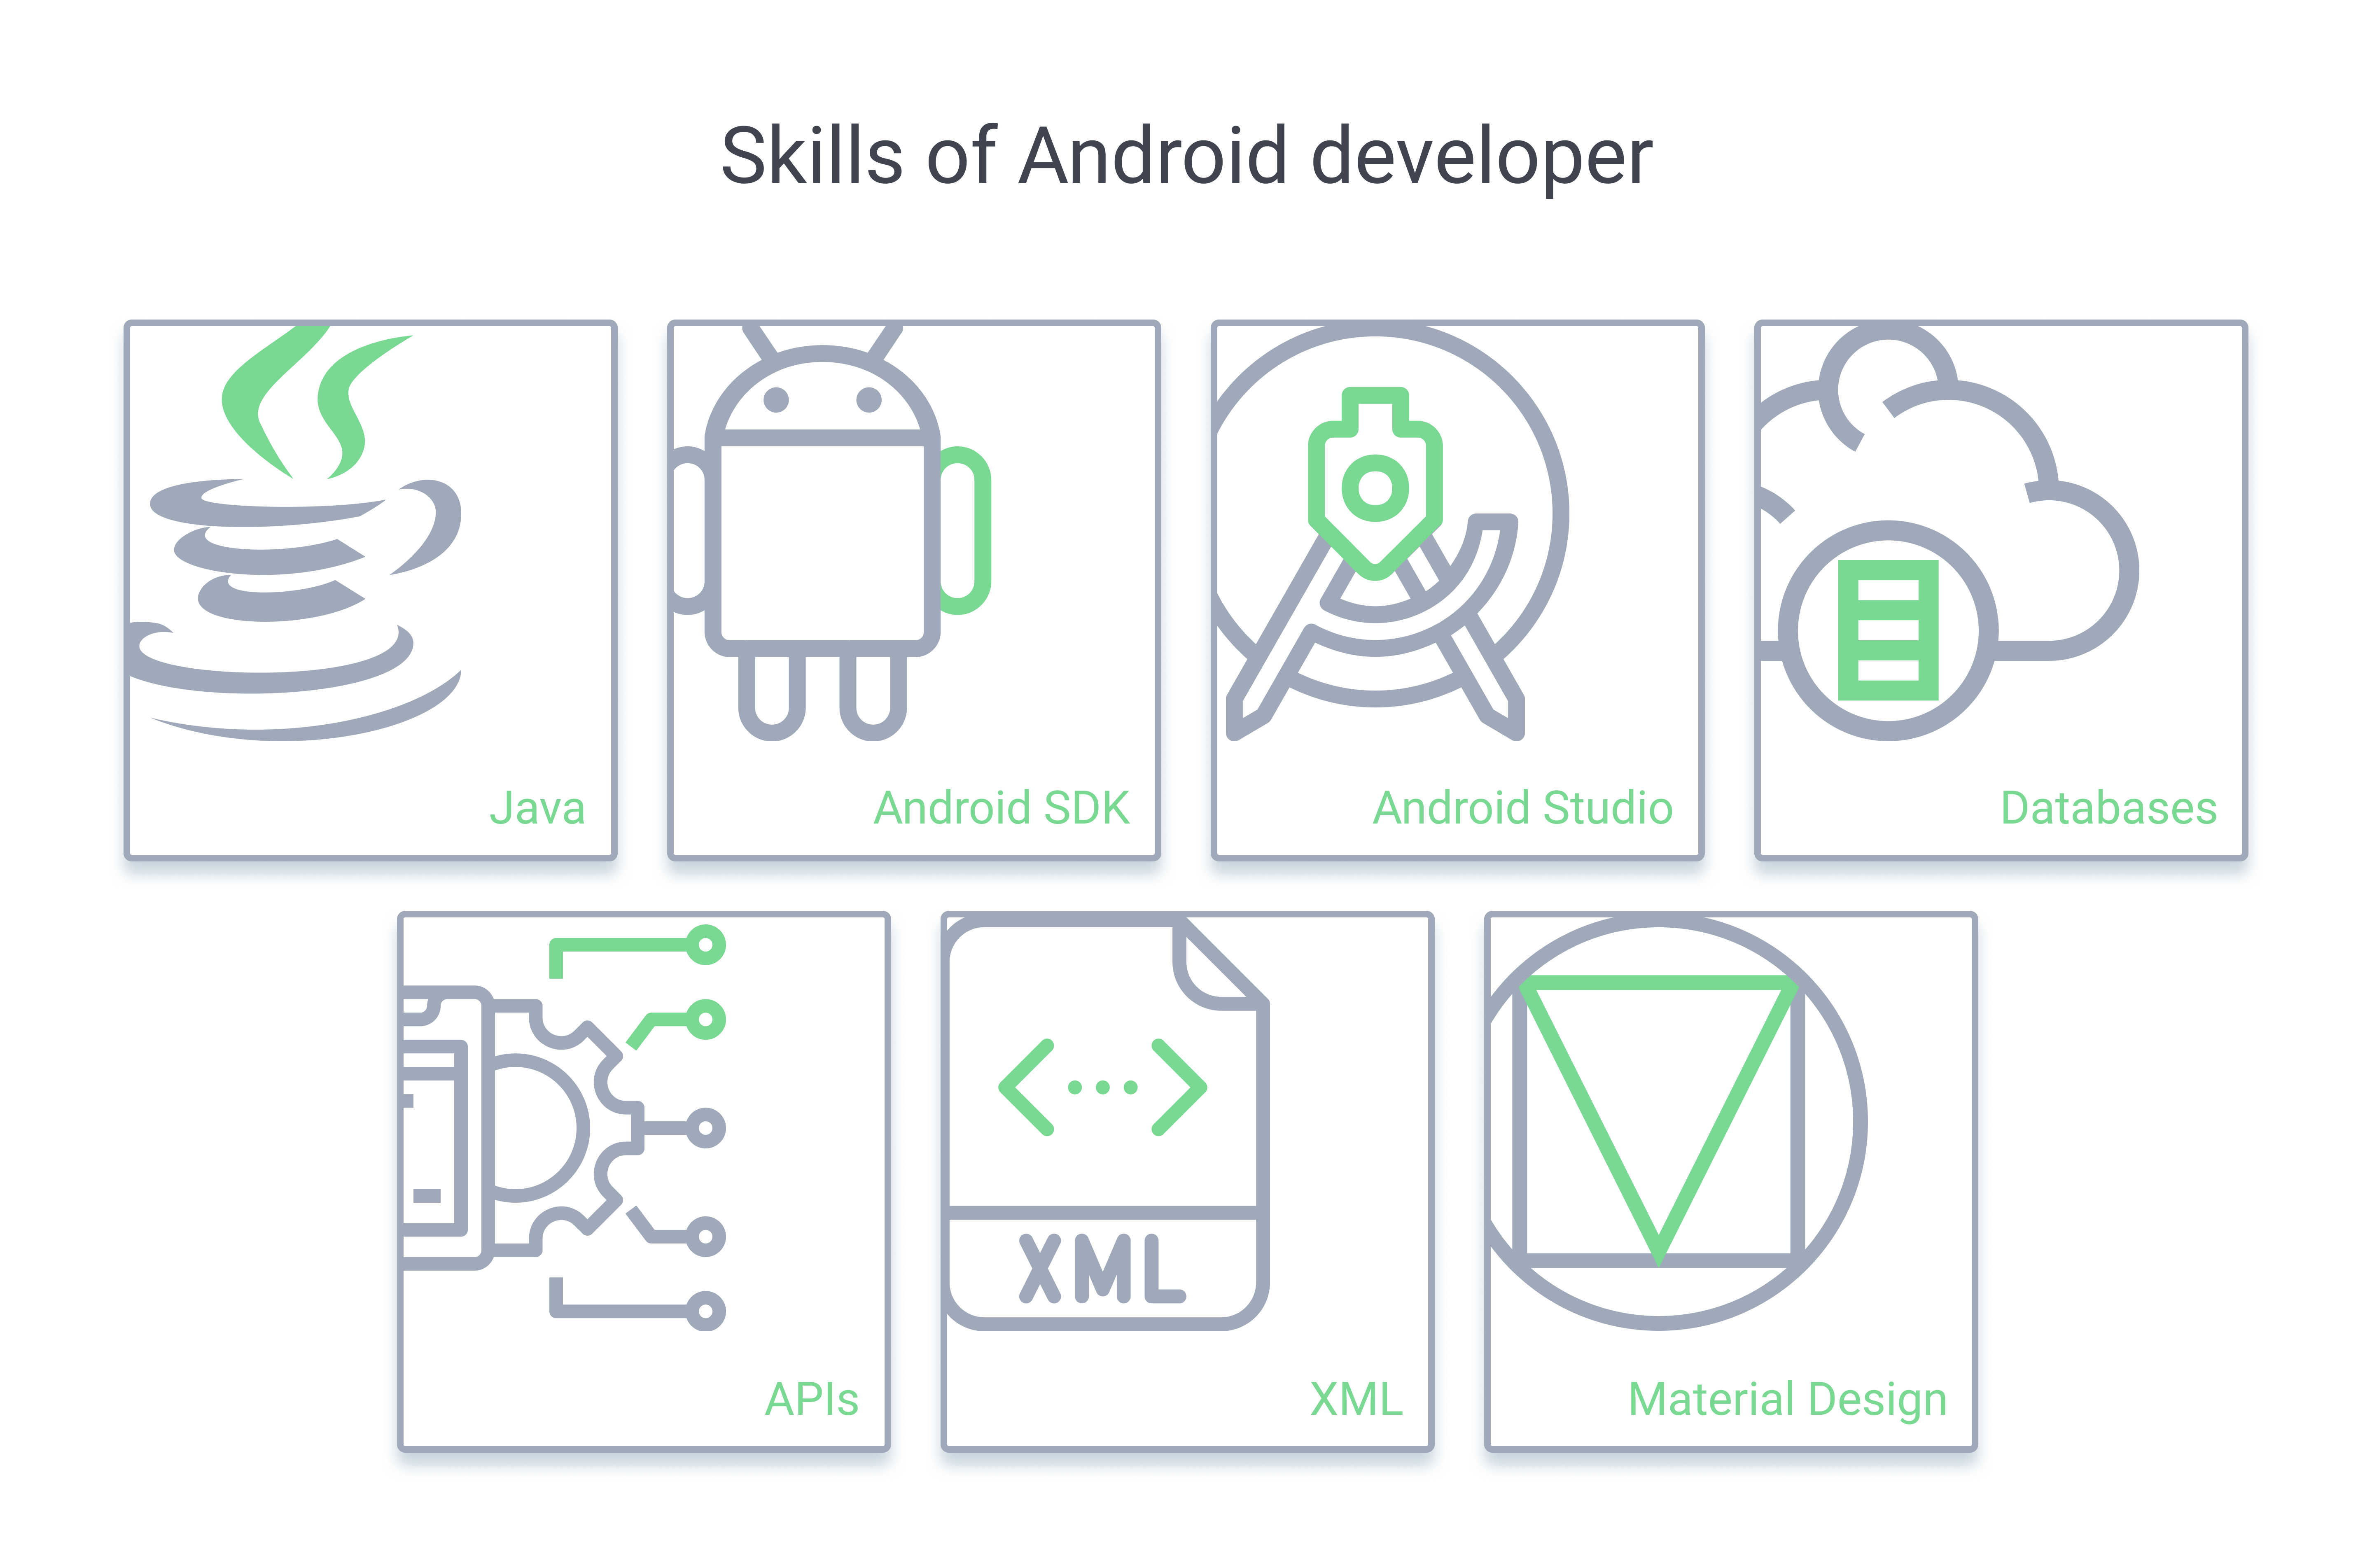 Essential skills for Android developer